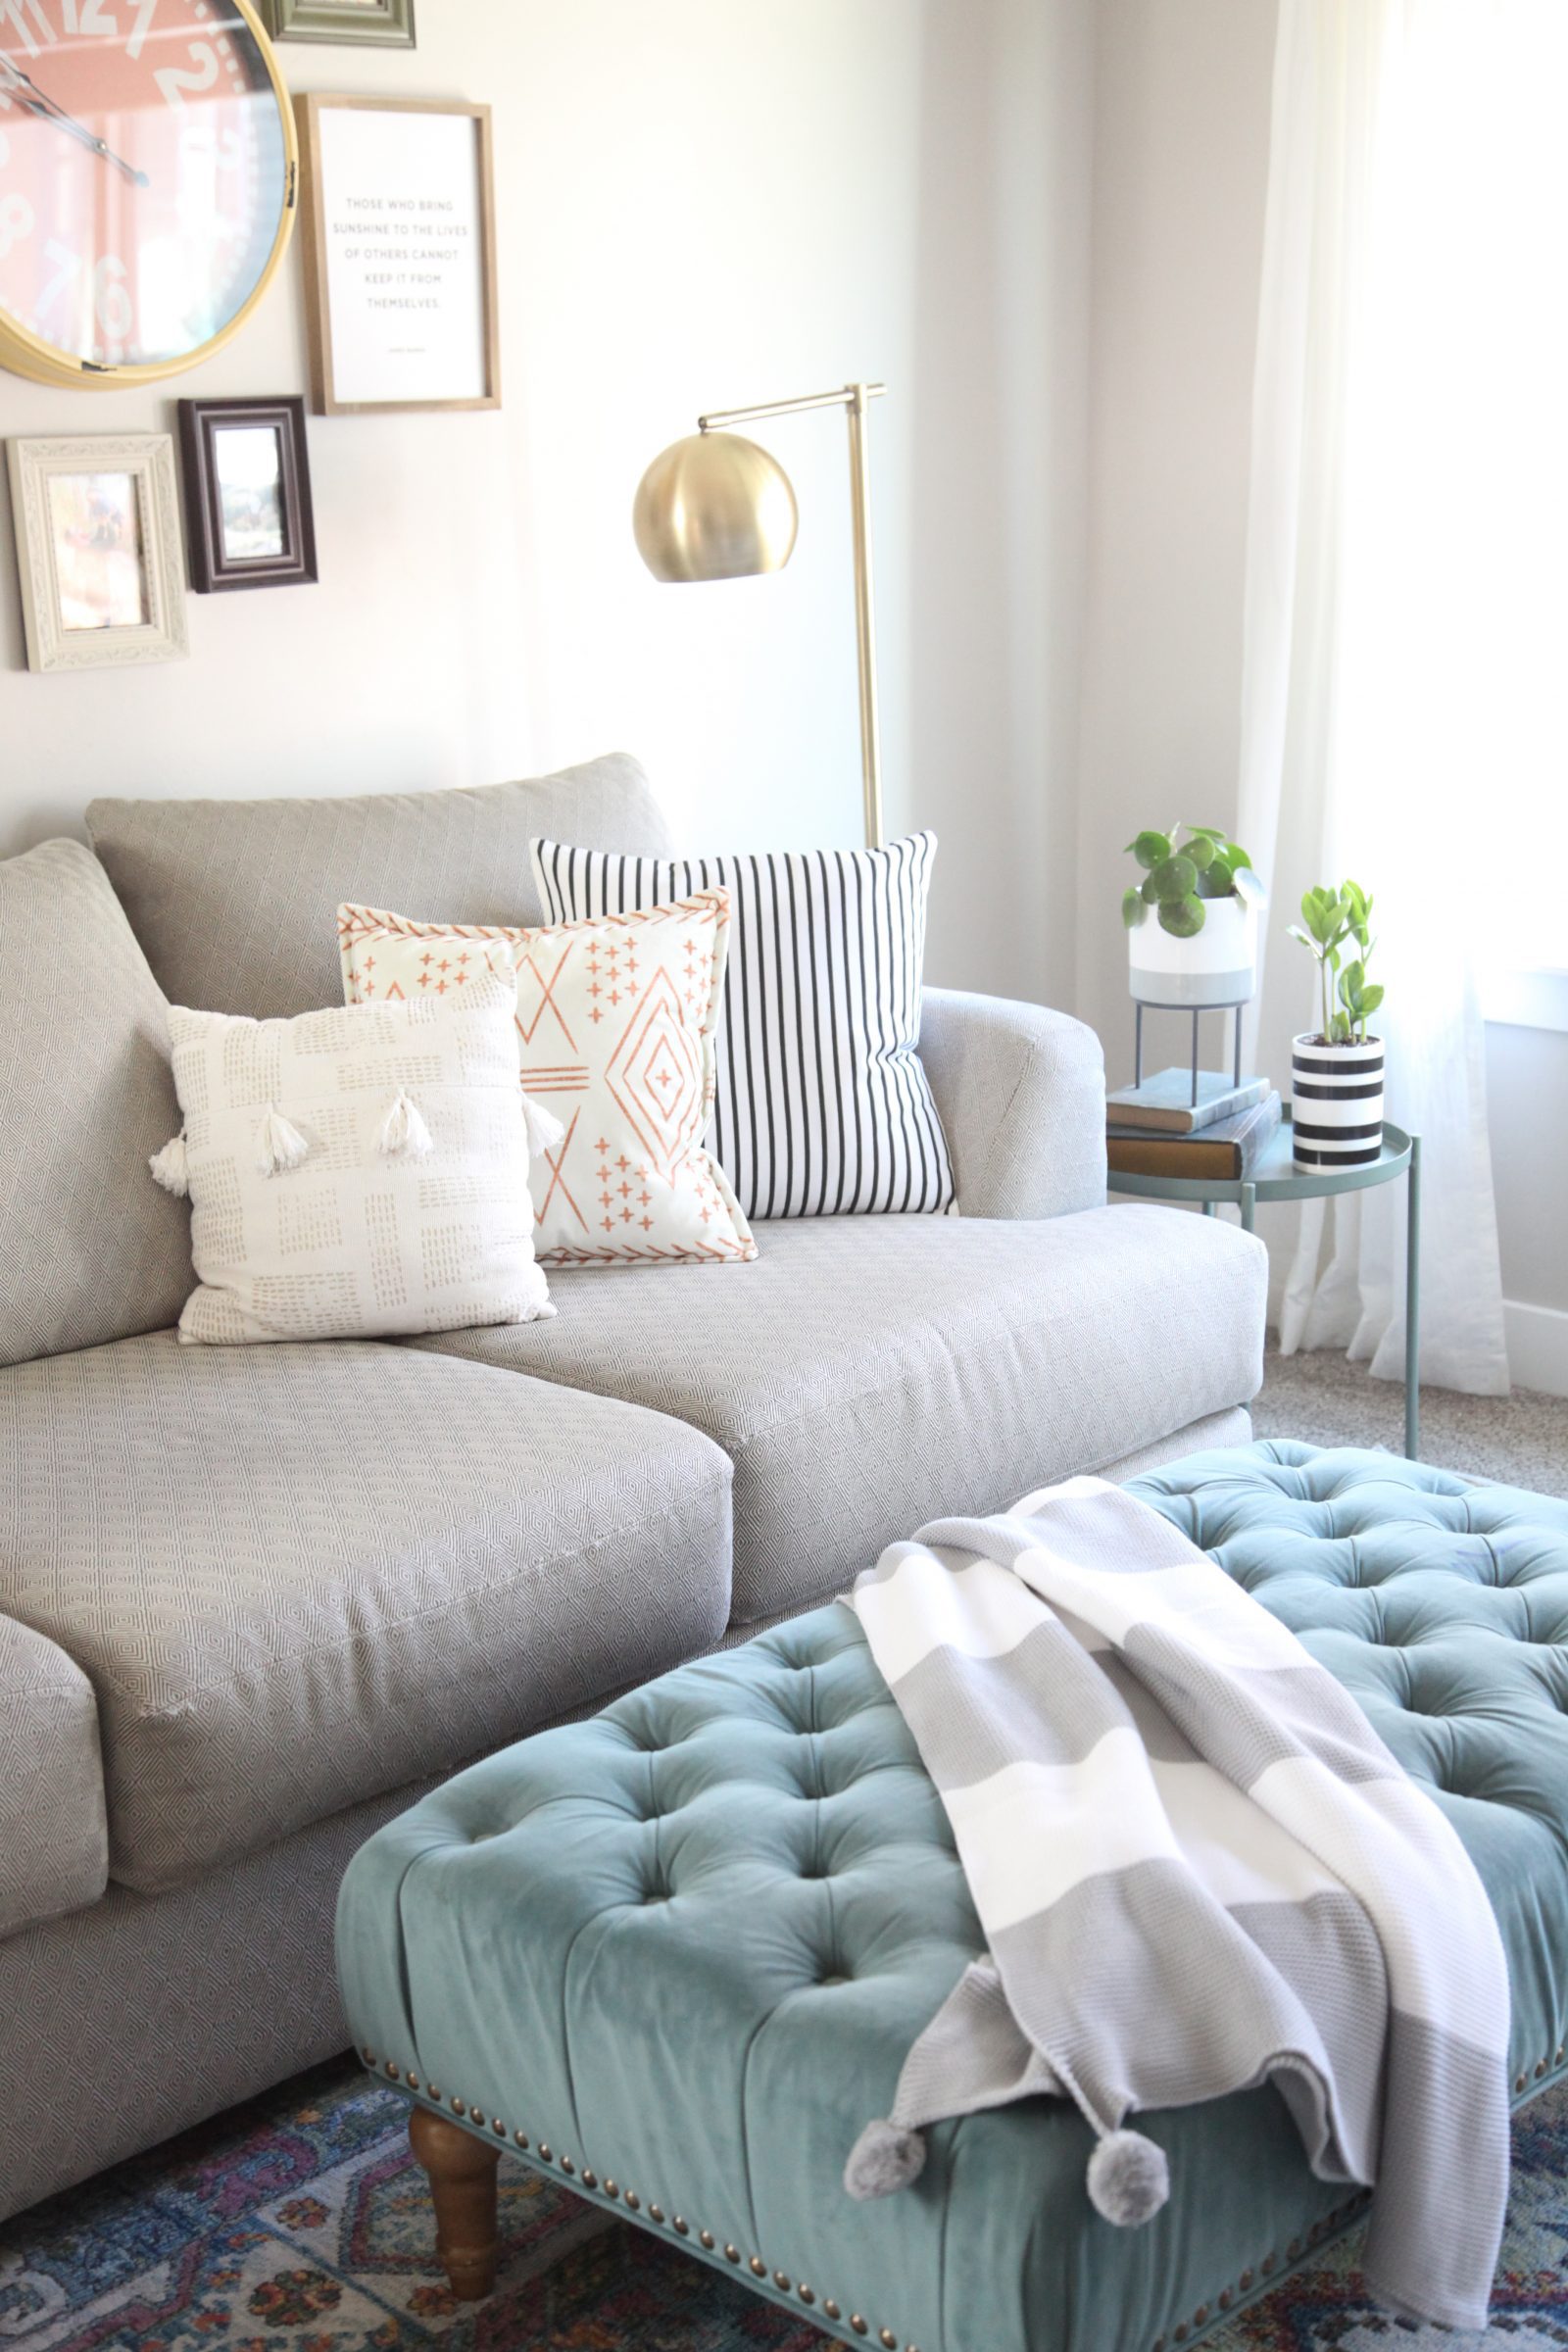 How To Freshen Up Your Living Room: 4 Simple Ideas | The Pretty Life Girls